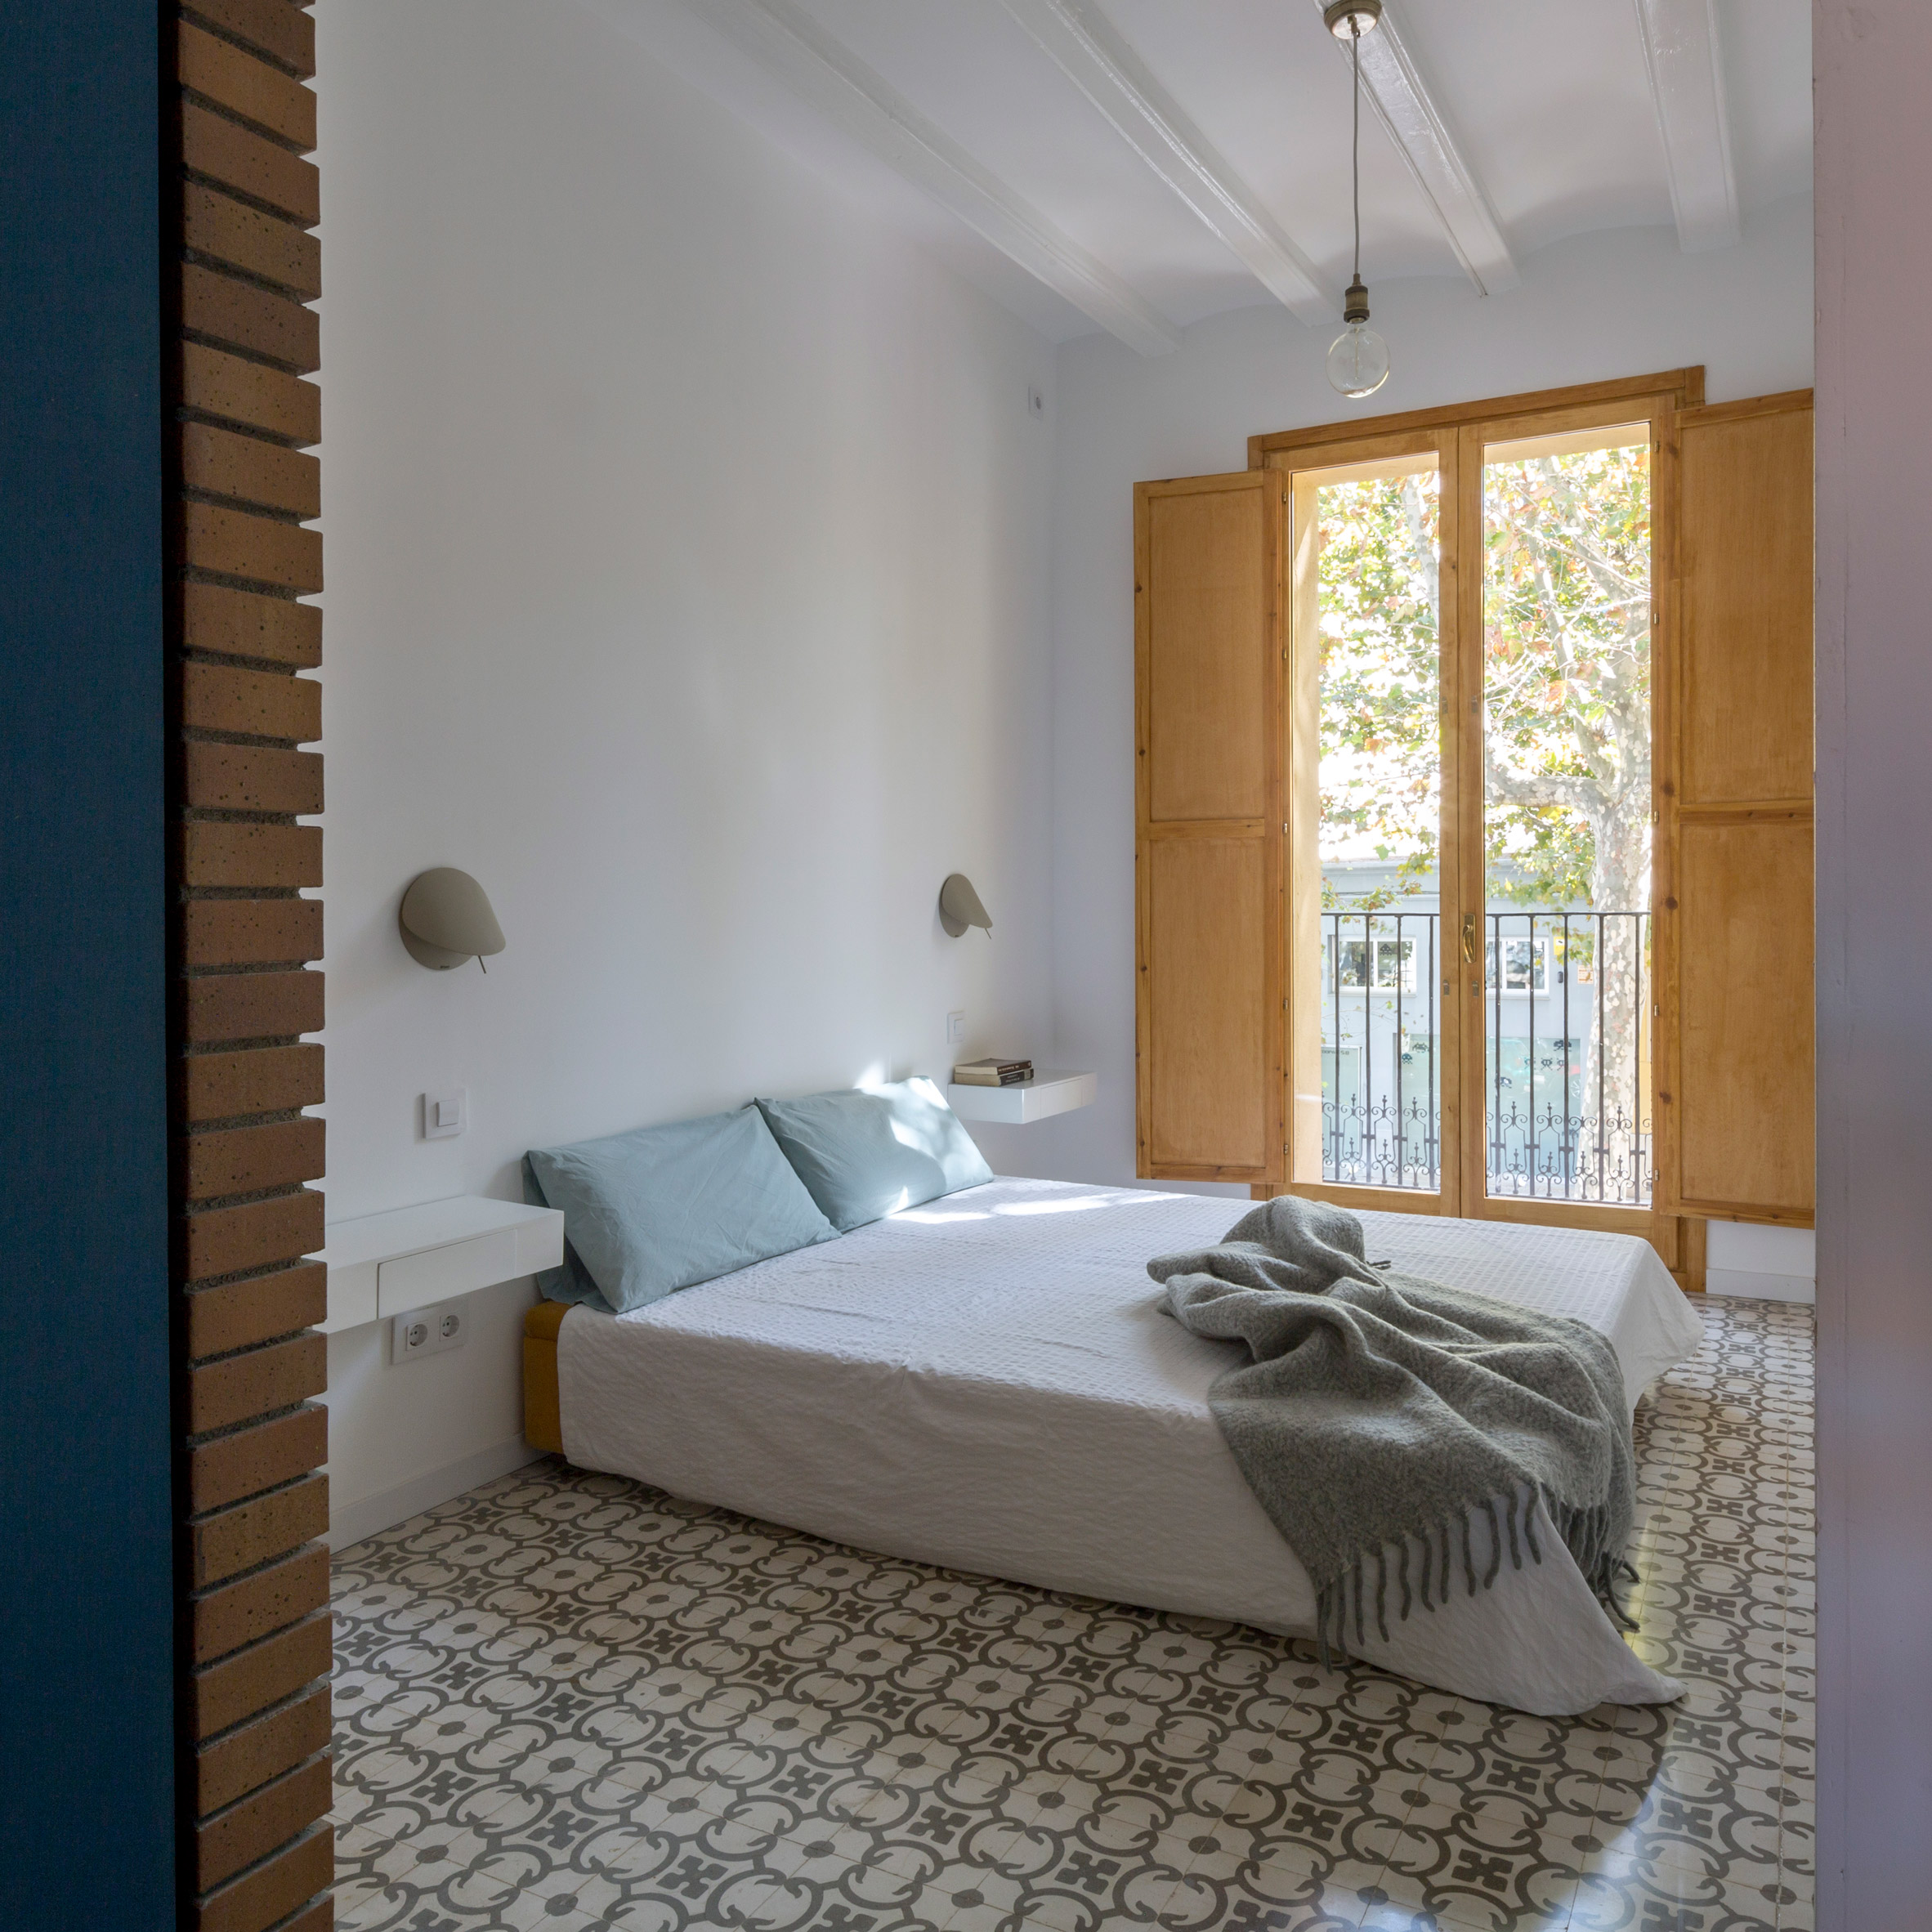 bed-and-blue-nook-architects-interiors-residential-barcelona-spain-spanish-houses-phase-one_dezeen_2364_col_5extra